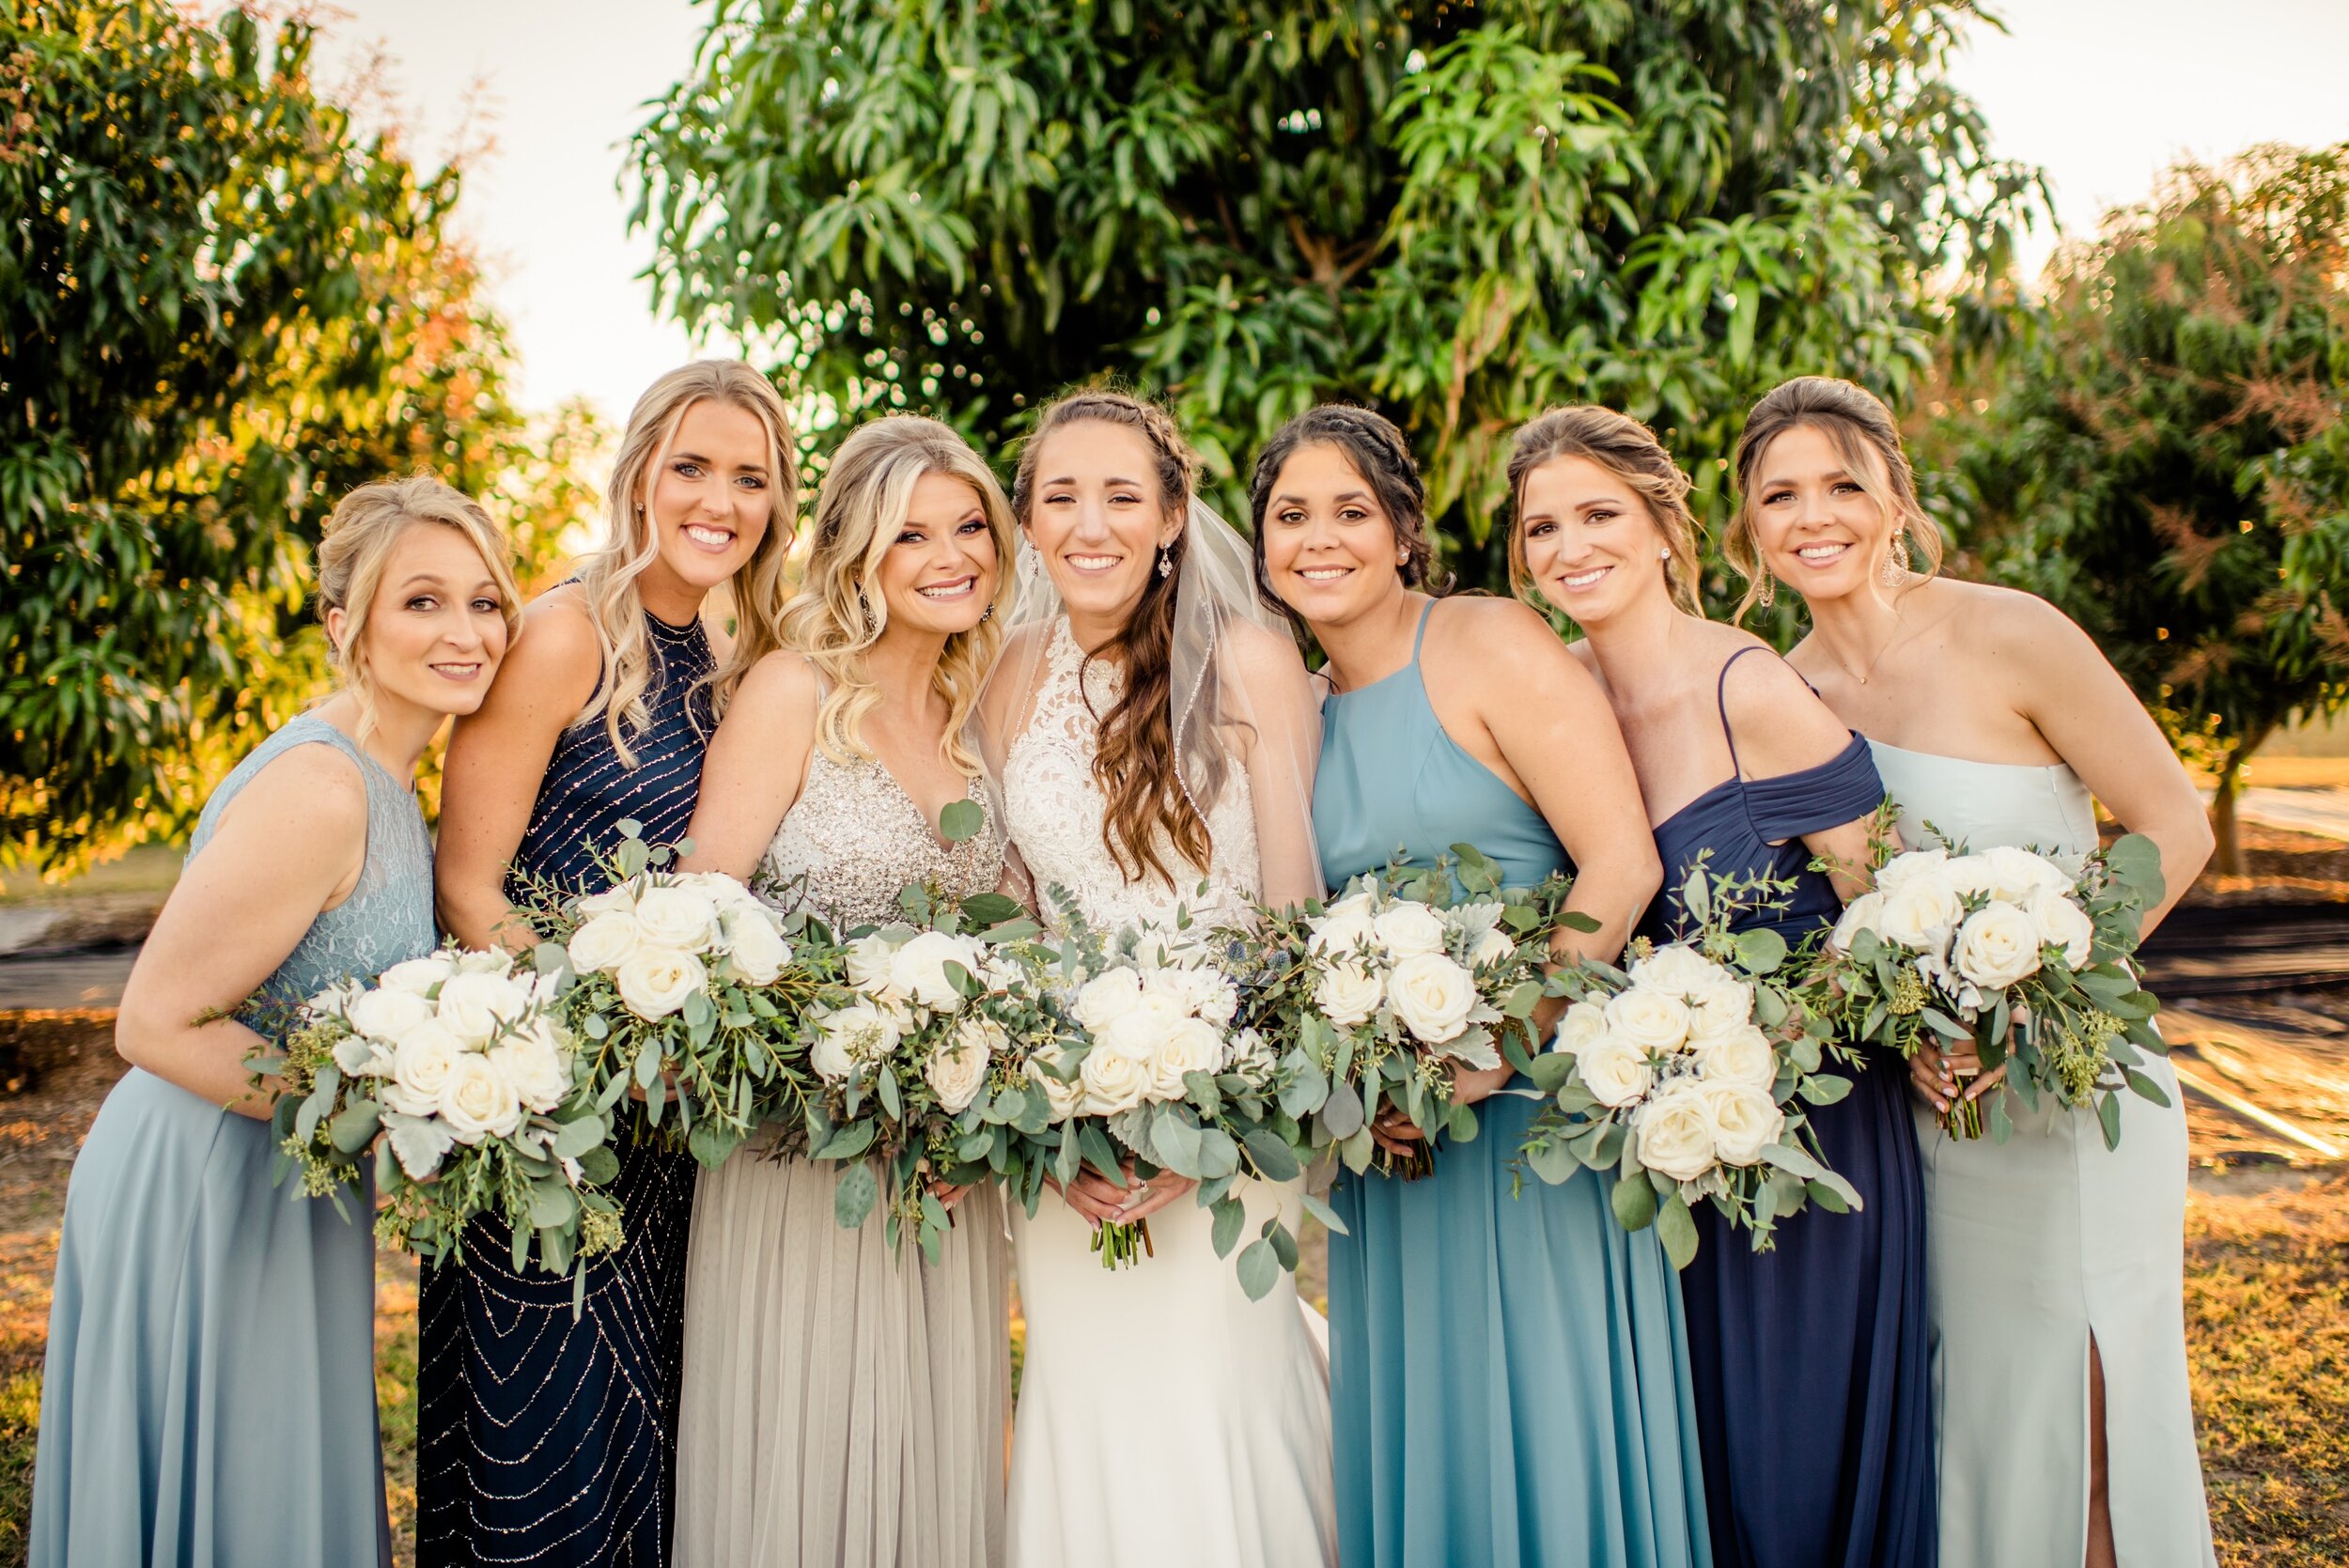 The bridesmaid in shades of blue with simple white and green eucalyptus bouquets